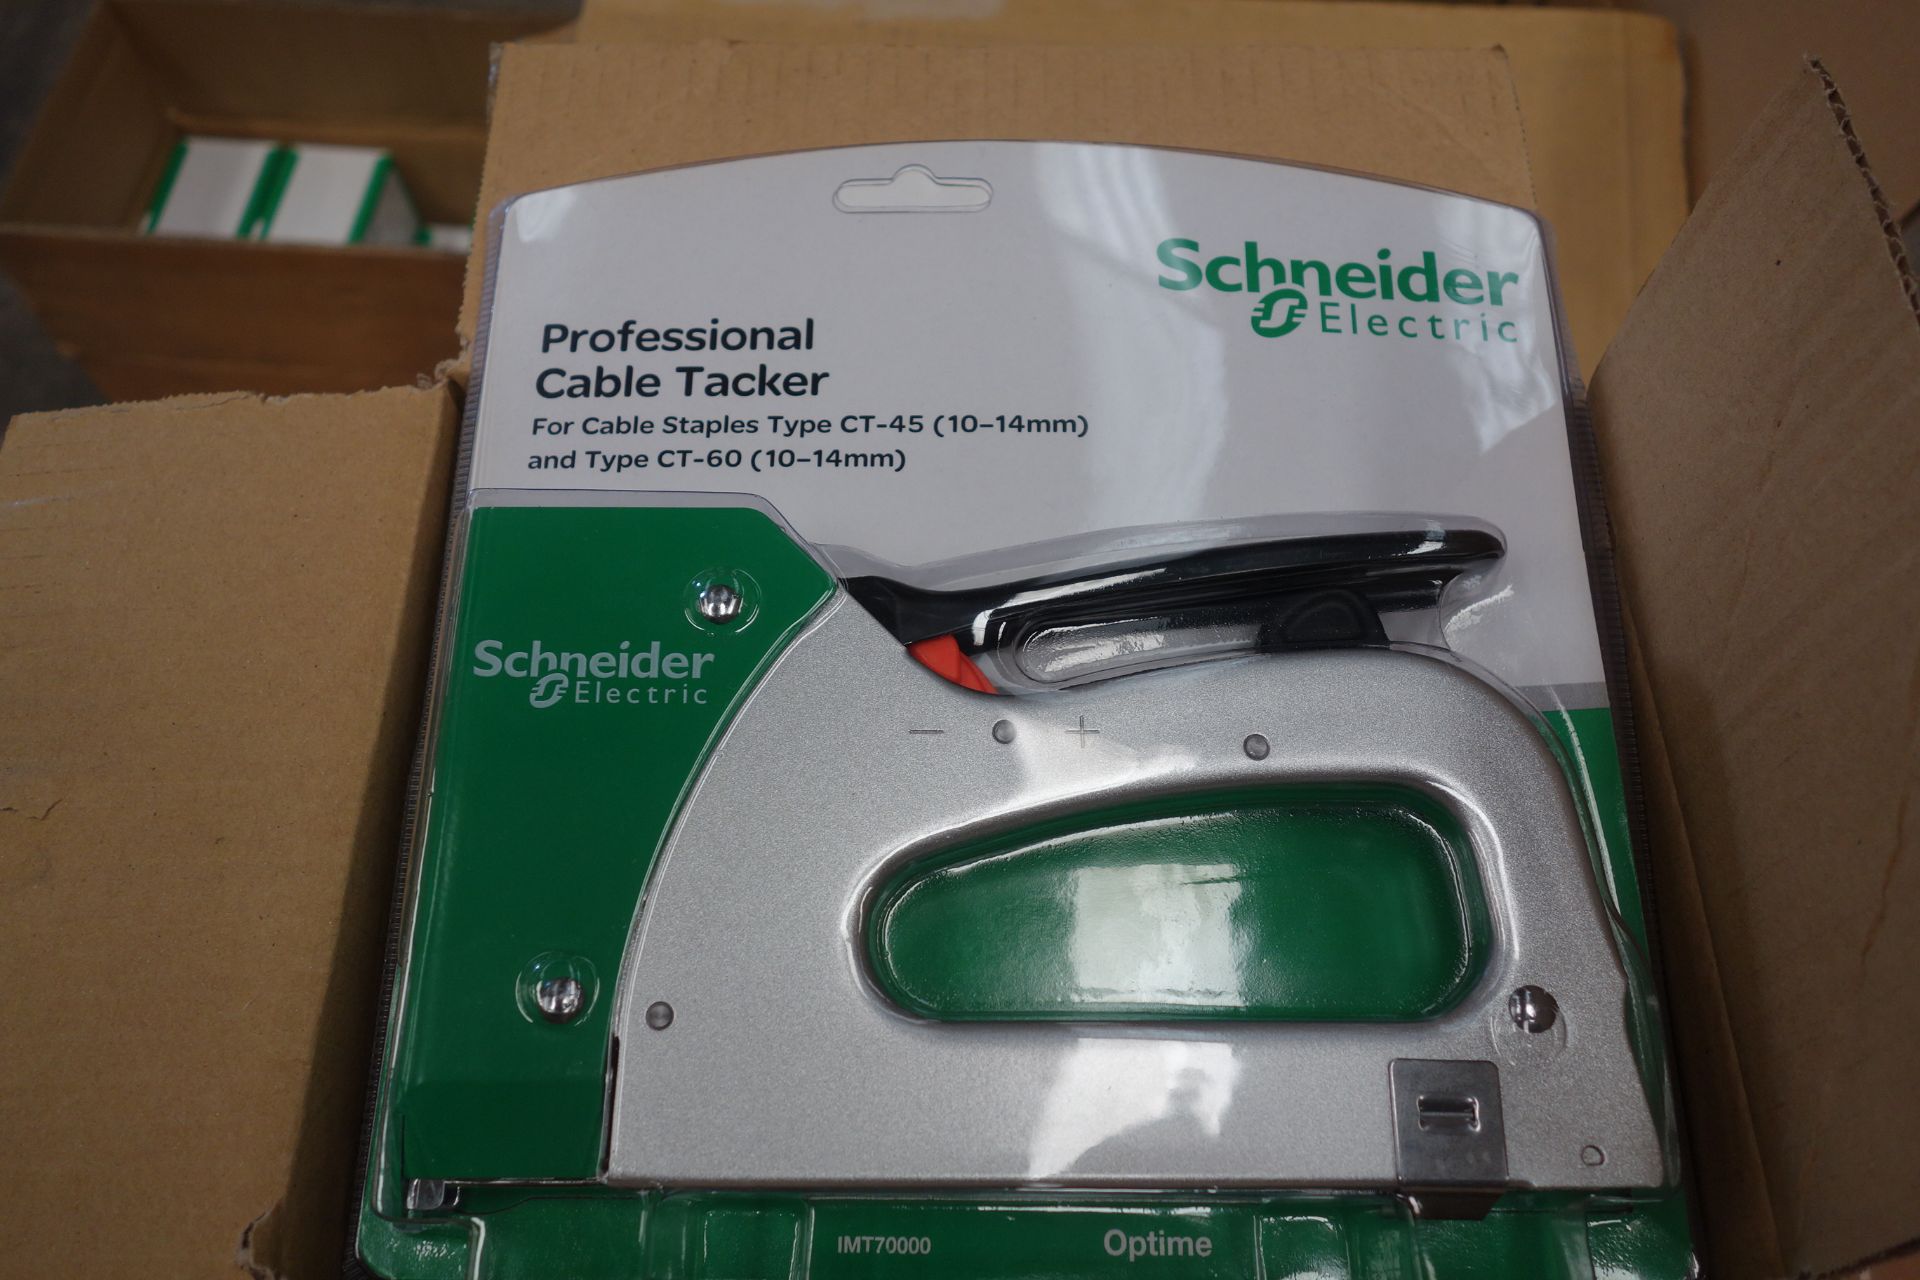 5 X Schneider IMT70000 Professional Cable Tacker For Cables CT-45 10-14MM + Type CT-60